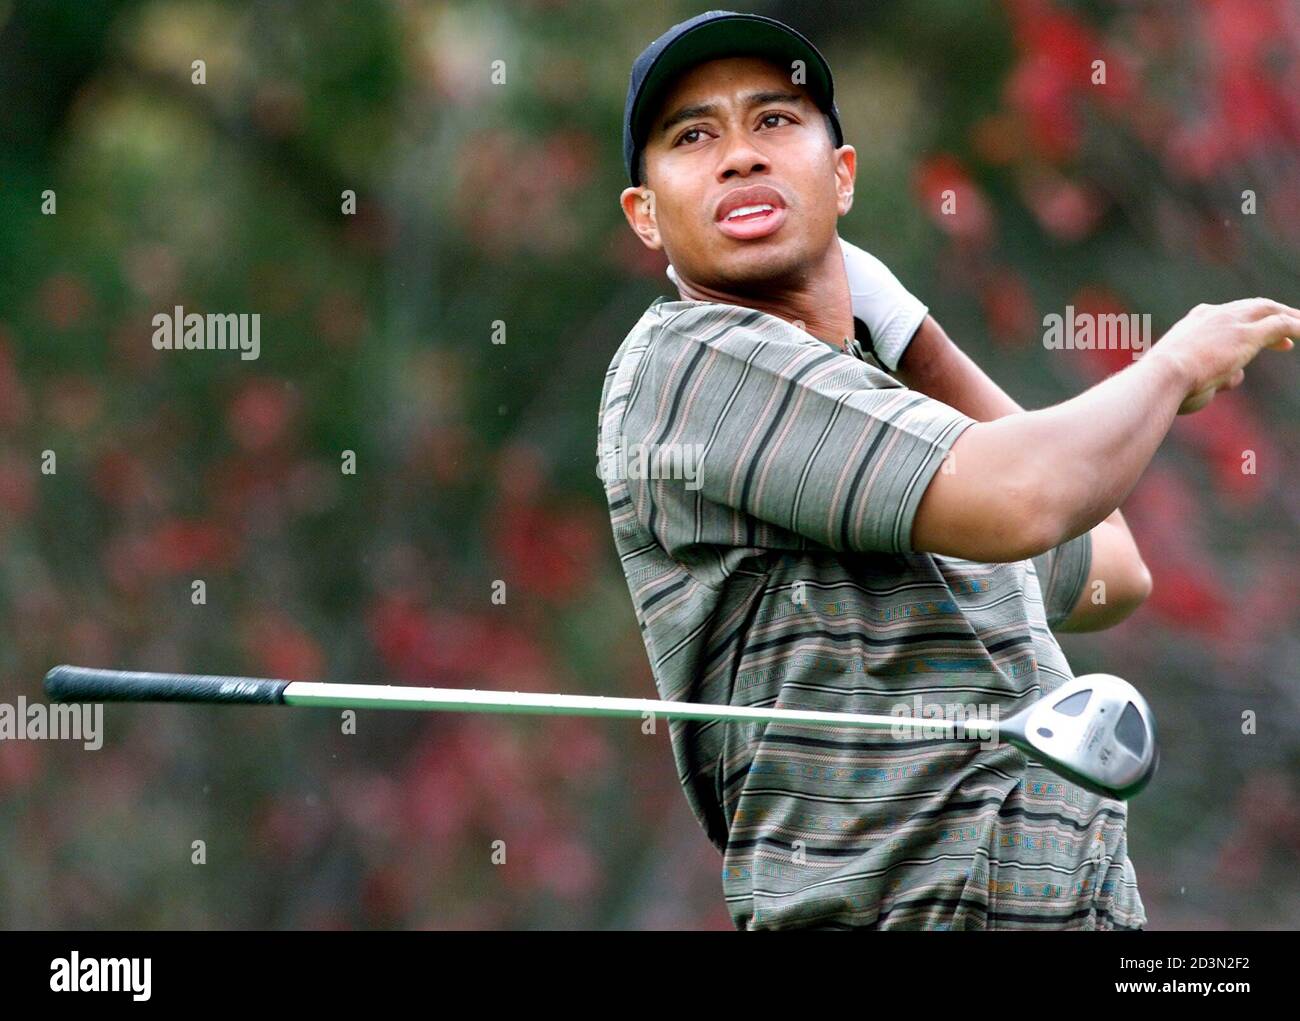 Tiger Woods of the United States loses grip on his club at the second hole tee box in the second round of the William's World Challenge golf tournament, December 1, 2000, at the Sherwood Country Club in Thousand Oaks, California. Woods shot a provisional drive for the out of bounds ball and saved par on the hole.  SSM/ME Stock Photo